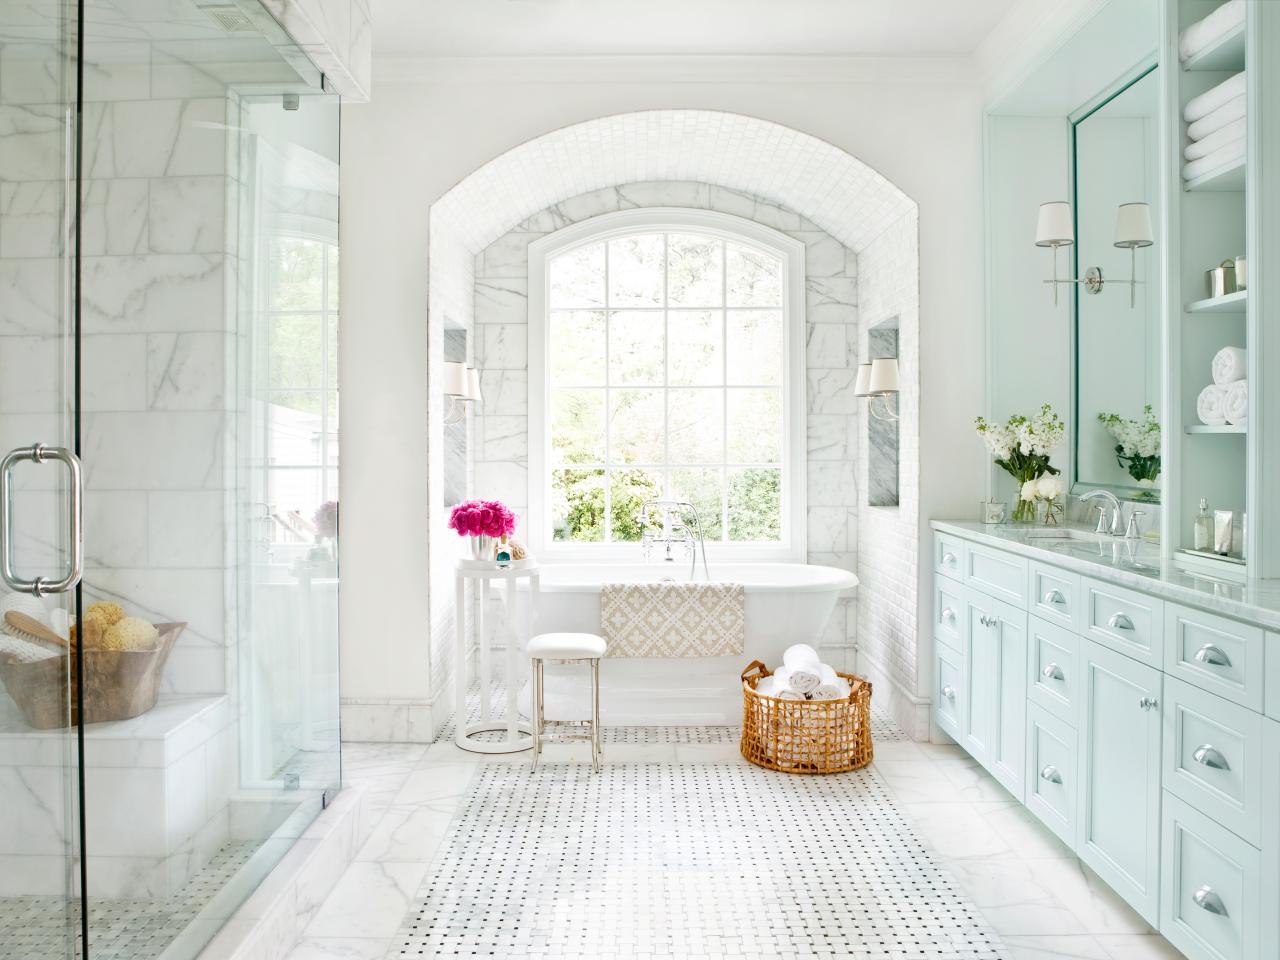 Main Bathroom Features for a Luxurious Space